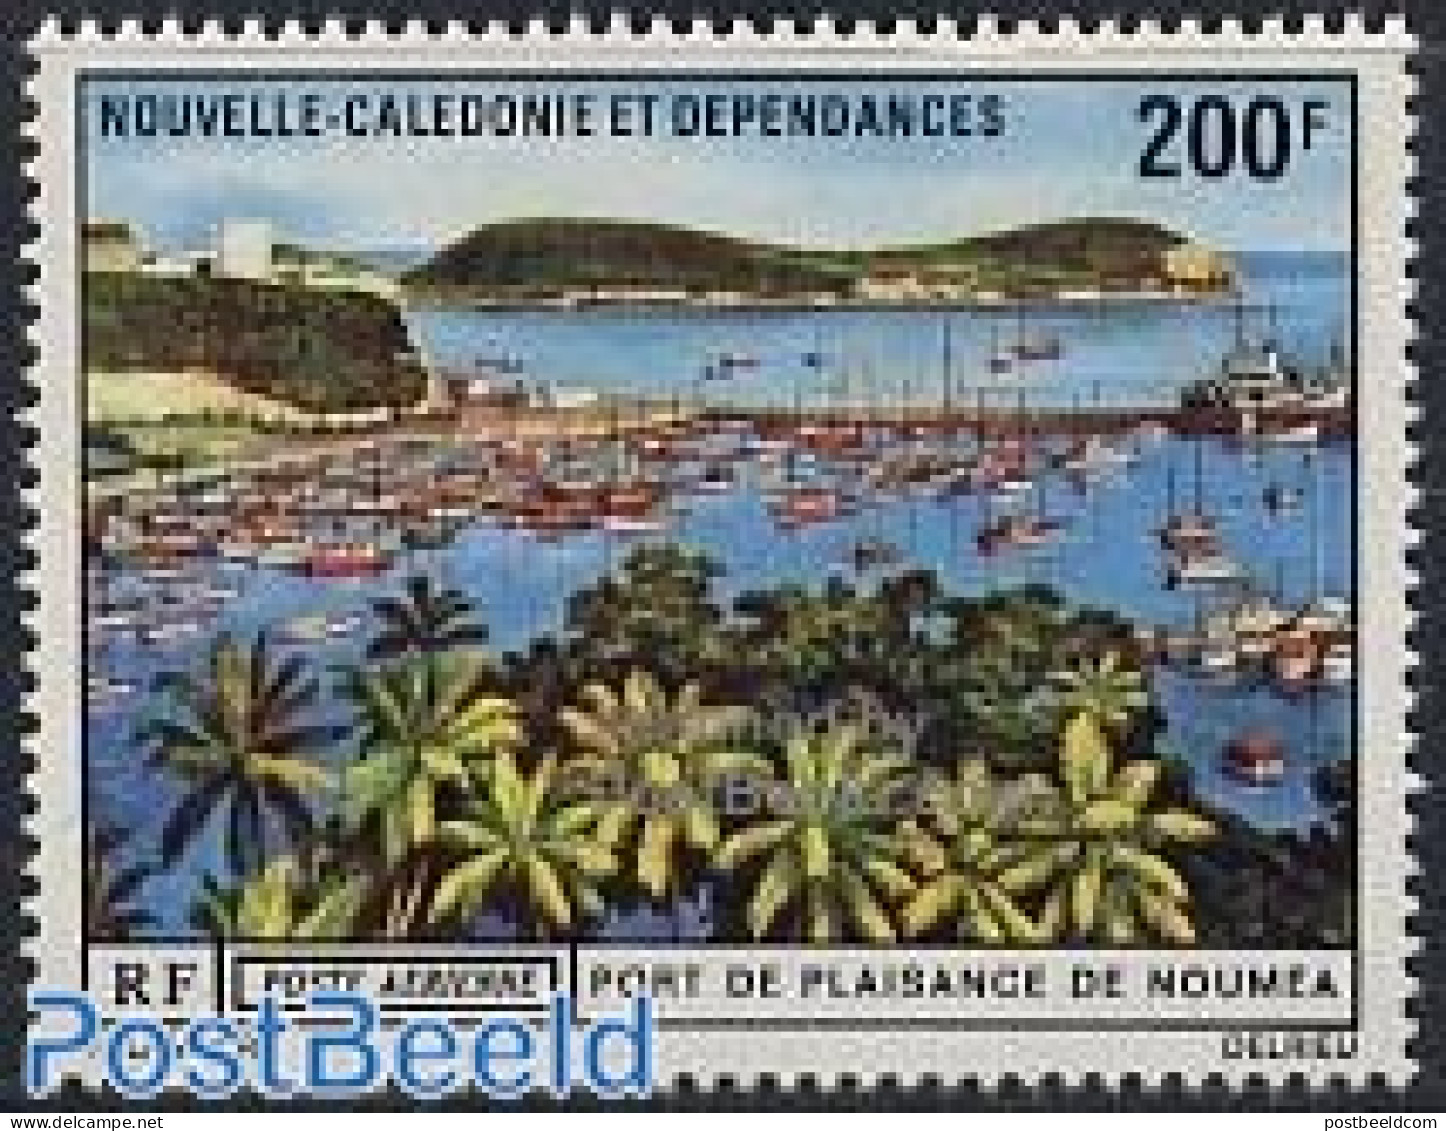 New Caledonia 1971 Yacht Harbour 1v, Mint NH, Transport - Ships And Boats - Nuevos